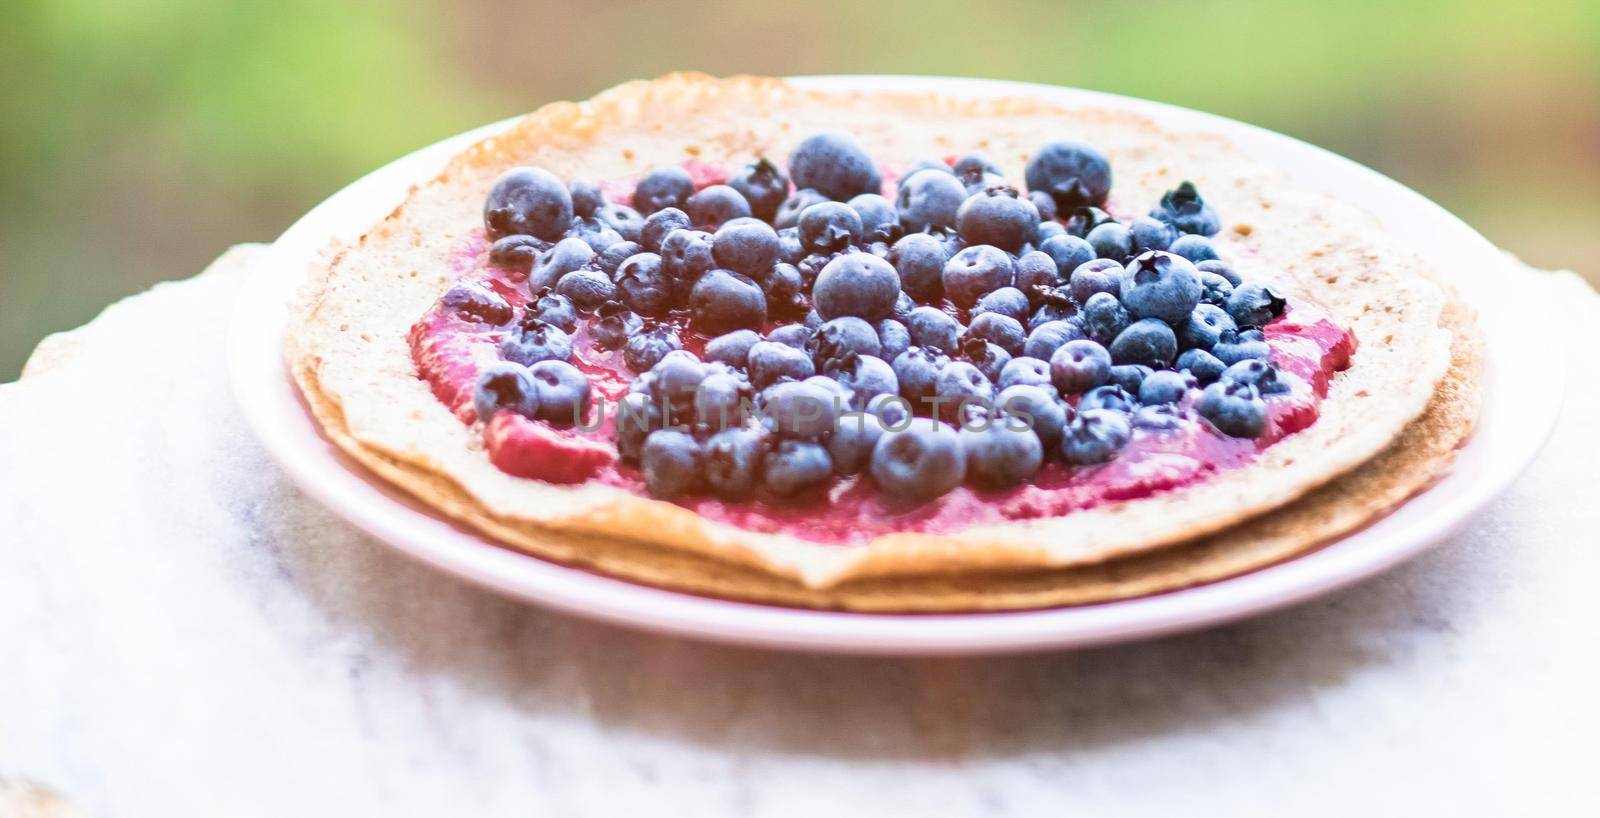 pastry dessert with blueberries - rustic cuisine recipes concept by Anneleven